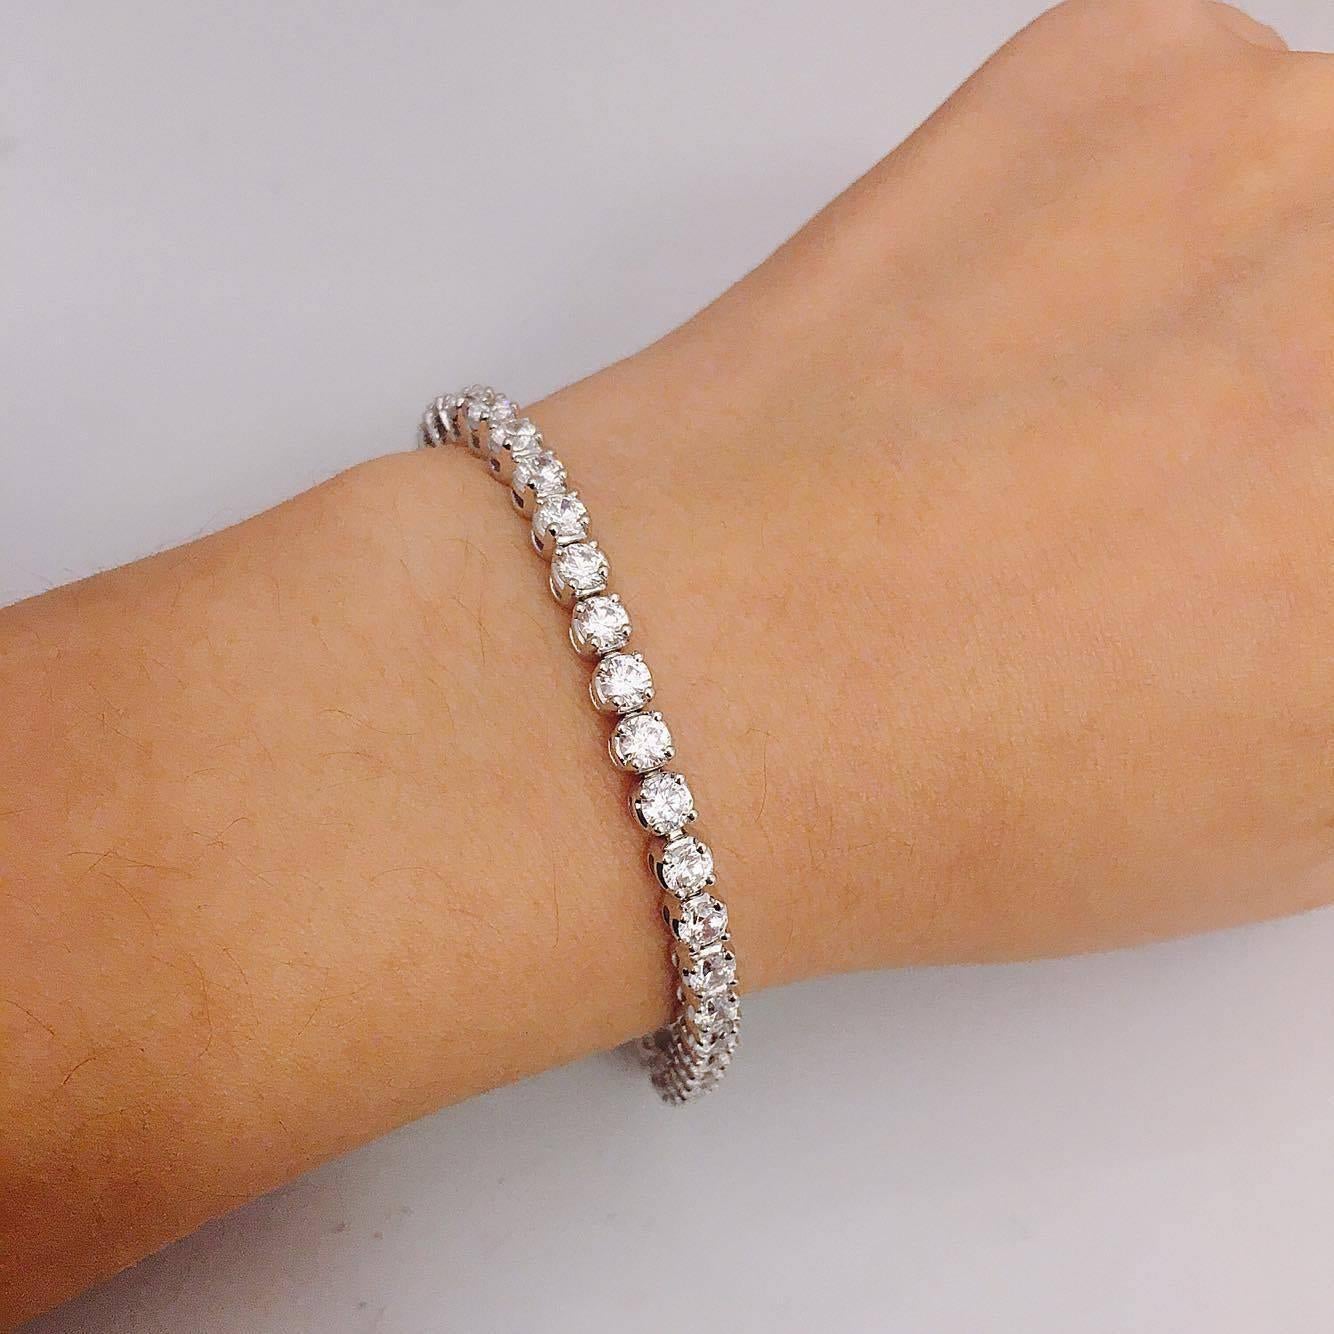 These diamonds were cut with perfection, and are filled with sparkle and life!
This Bracelet was designed and manufactured by Emilio!

Can be ordered in any size/white/yellow/rose gold.
Approx t.w.: 7.00cts
Color: F 
Clarity: Vs 
Cut: Excellent